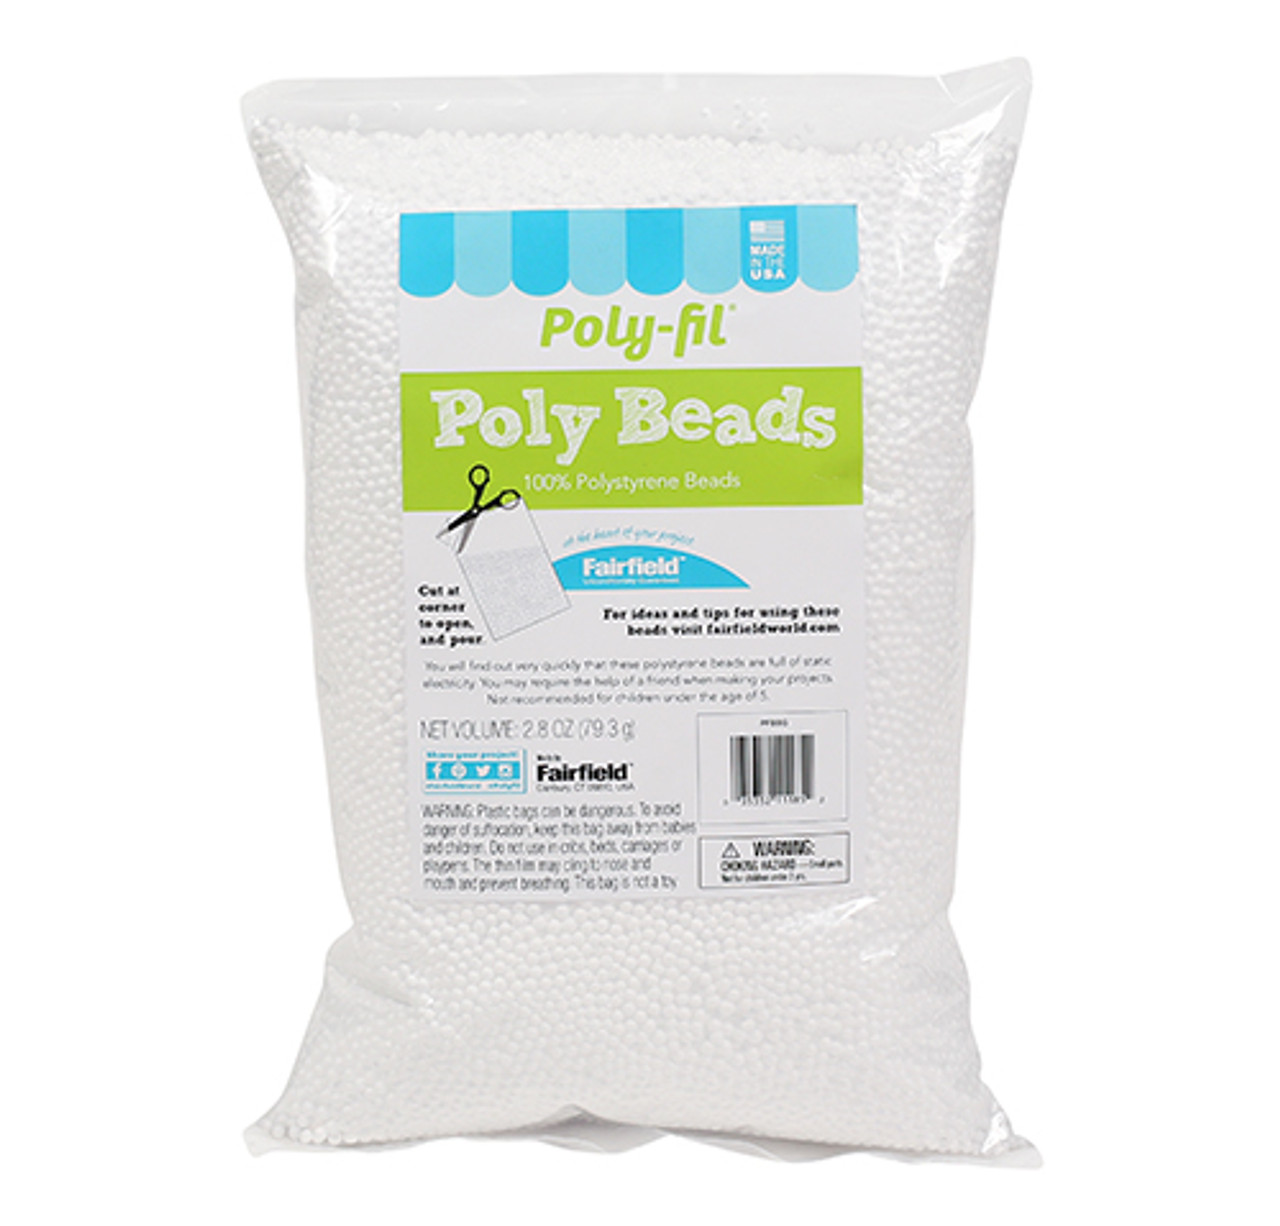 Poly-Fil Poly-Pellets Weighted Stuffing and Filling Beads - 10lb. Box -  Walmart.com